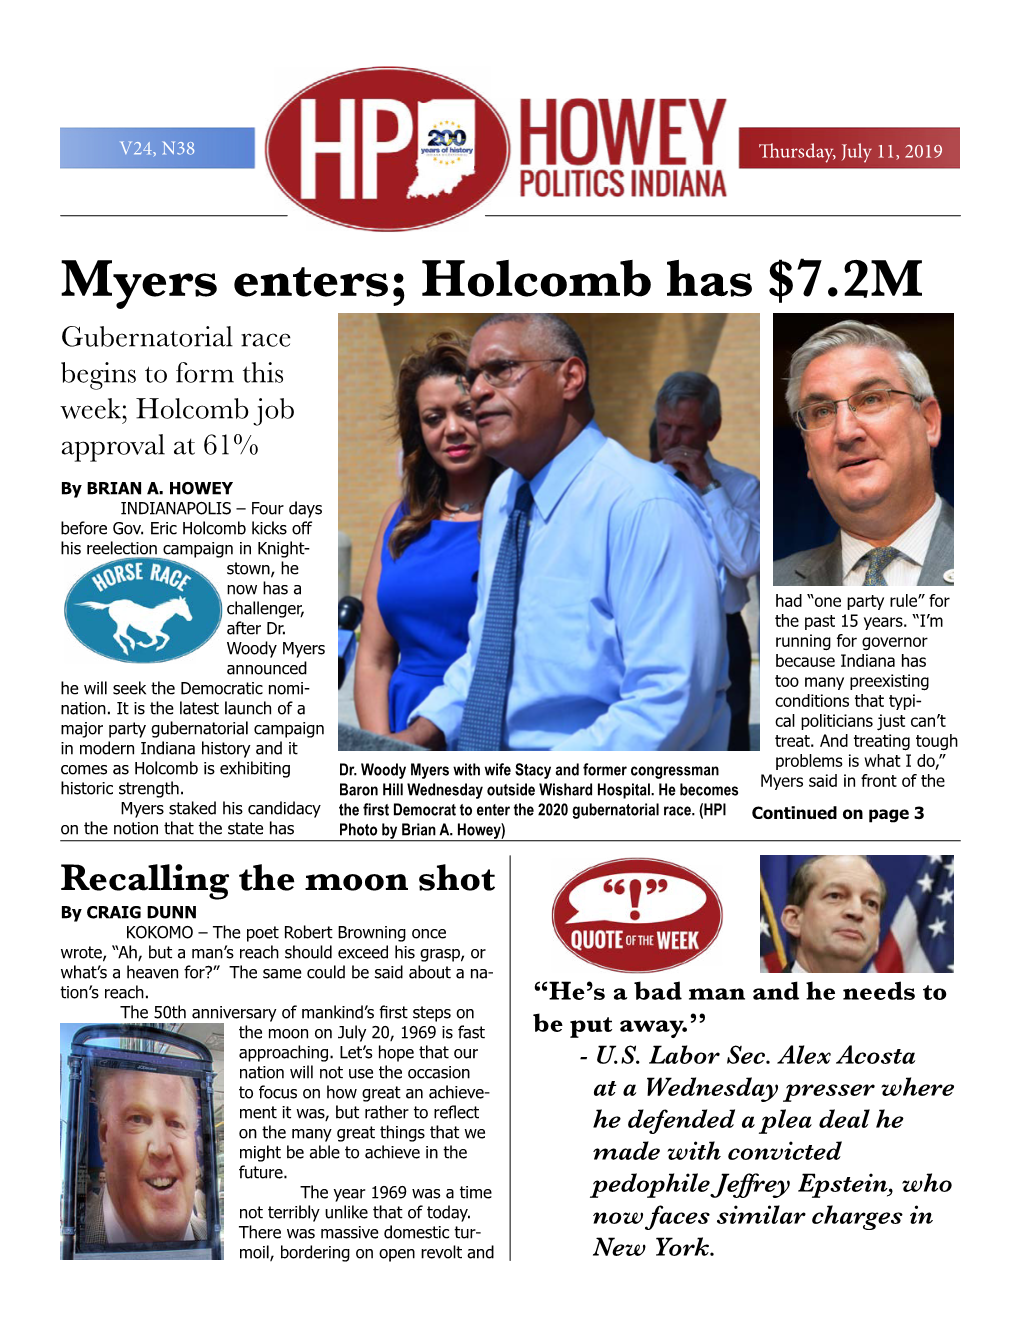 Myers Enters; Holcomb Has $7.2M Gubernatorial Race Begins to Form This Week; Holcomb Job Approval at 61% by BRIAN A